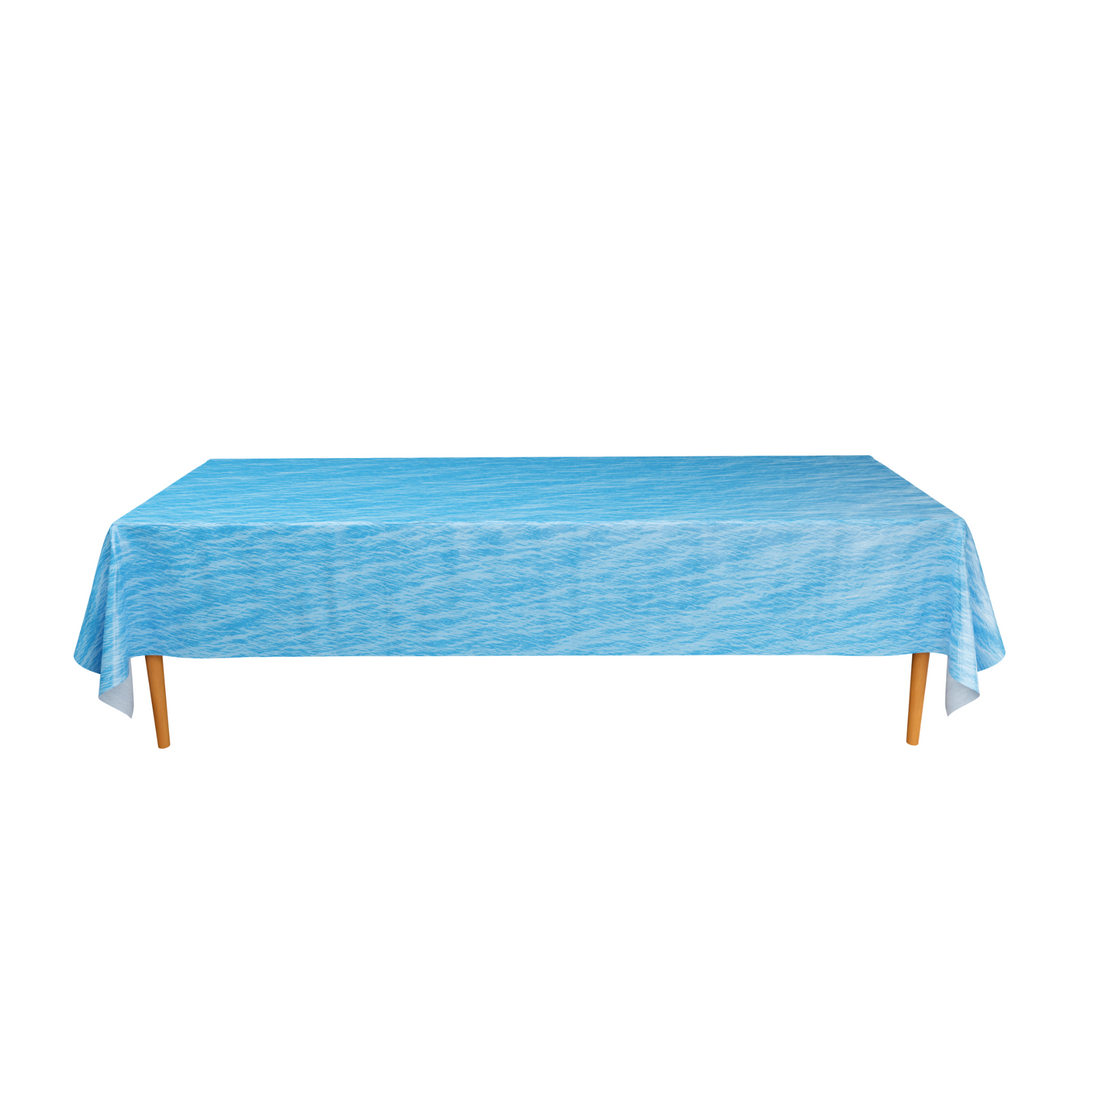 Dive into Fun with Discount Party Supplies' Ocean Table Cover!